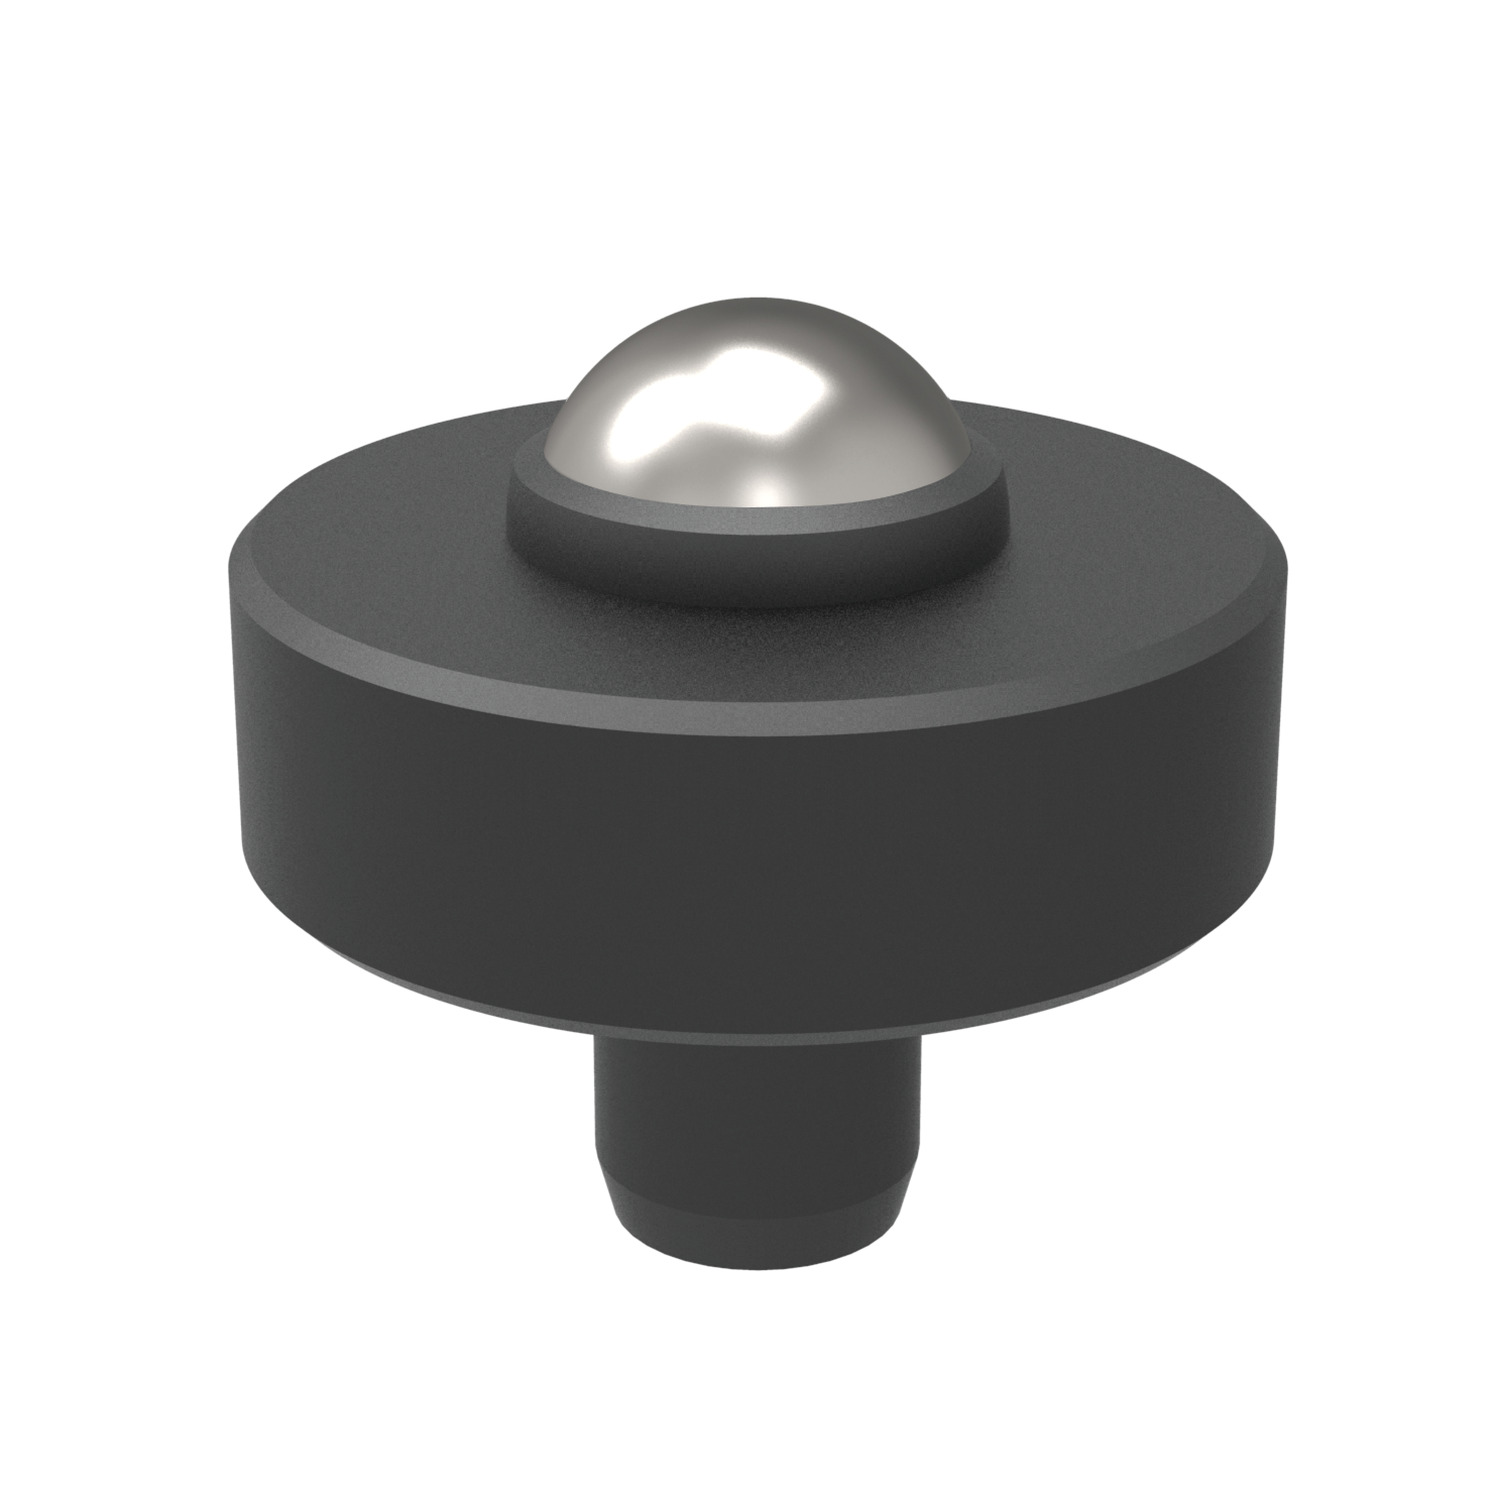 Locating Pad - Pivot Ball Designed for use with screw jacks and for supporting heavy duty cast iron and forged parts.